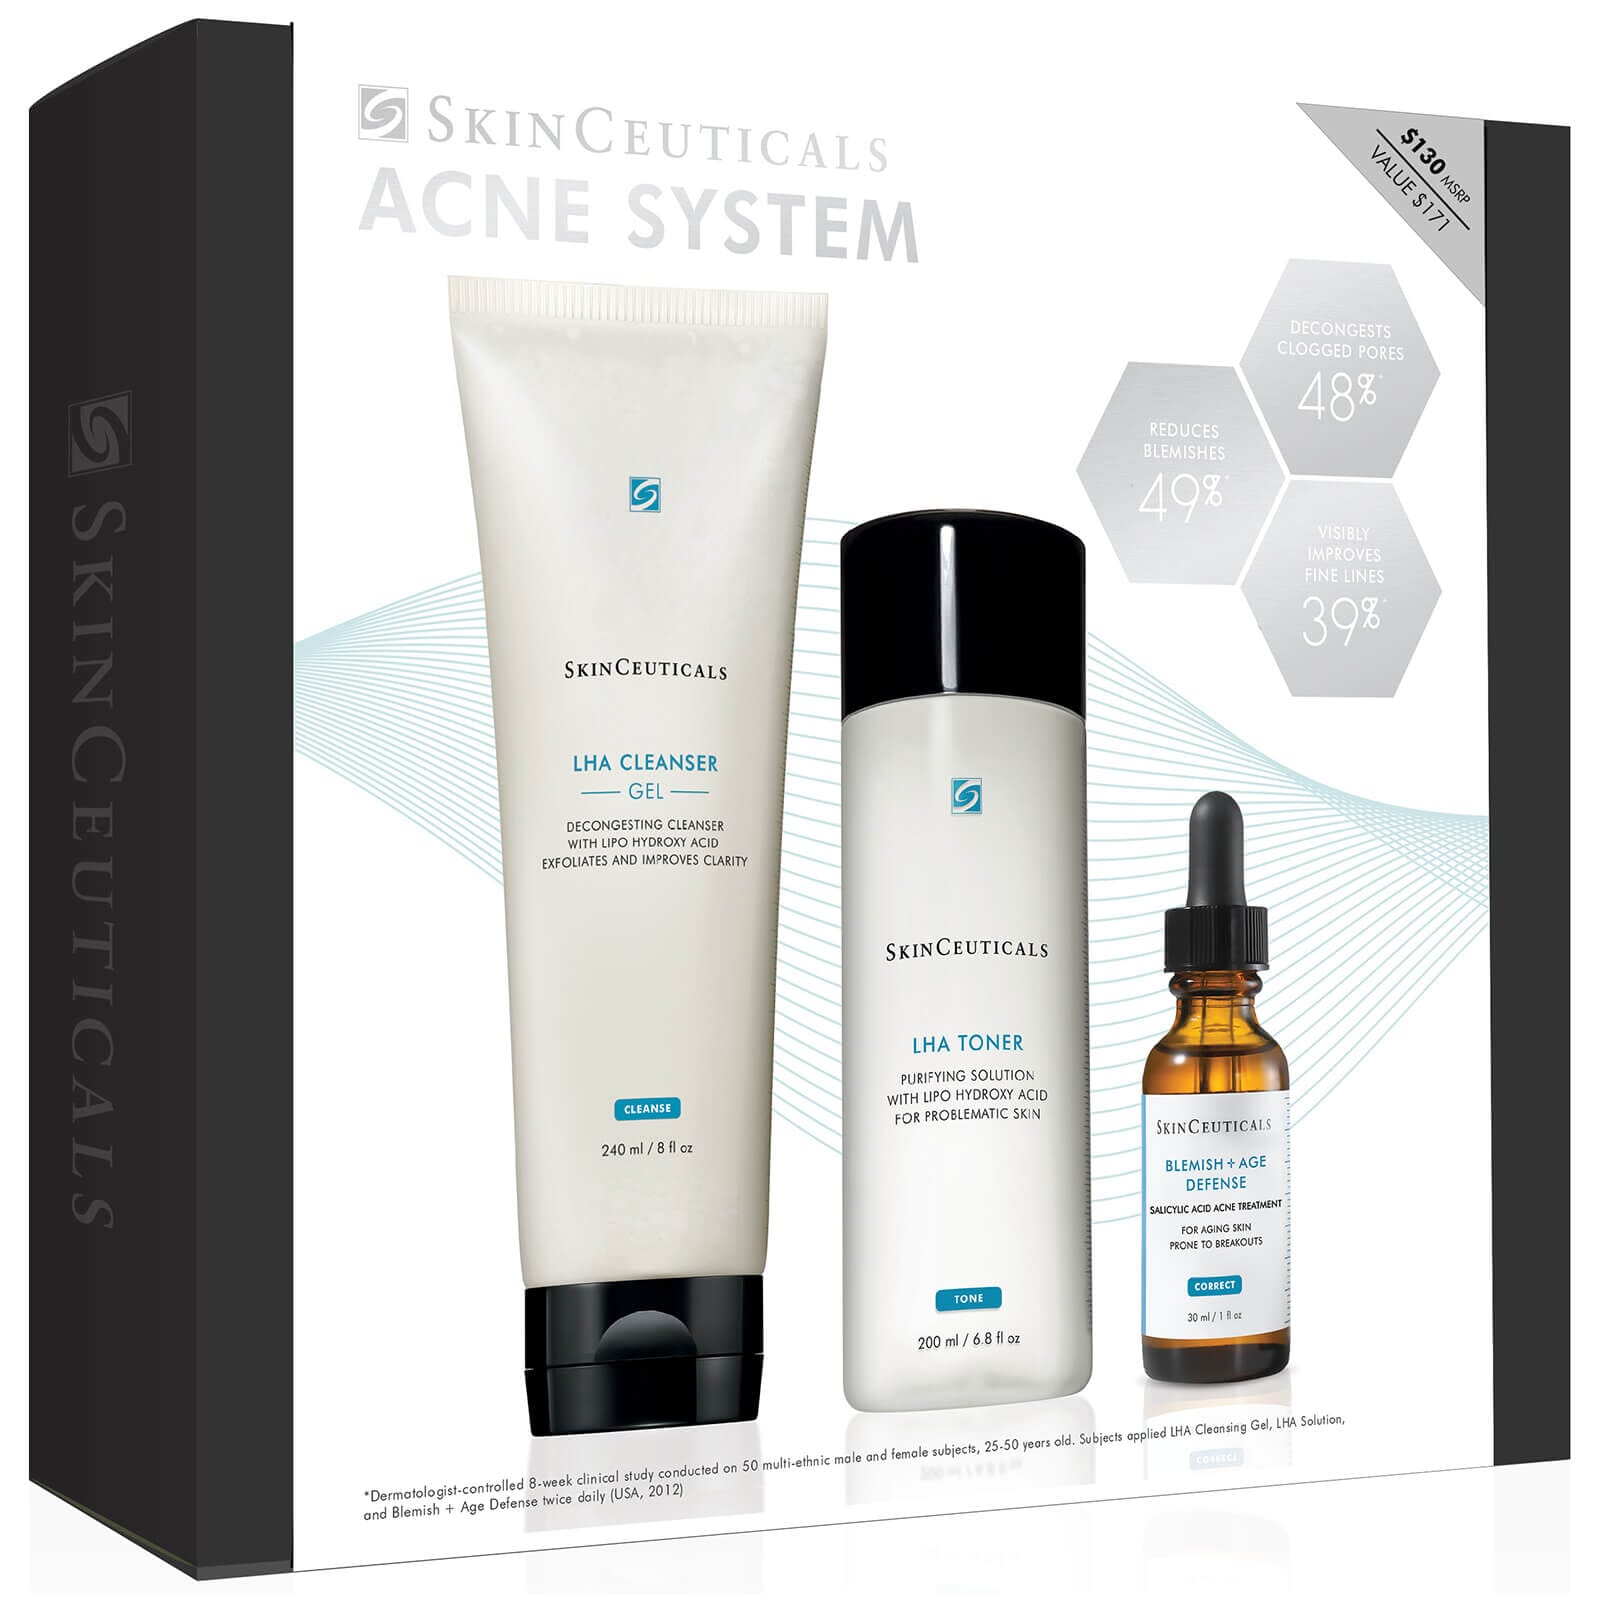 SkinCeuticals Acne System SkinCeuticals Shop at Exclusive Beauty Club